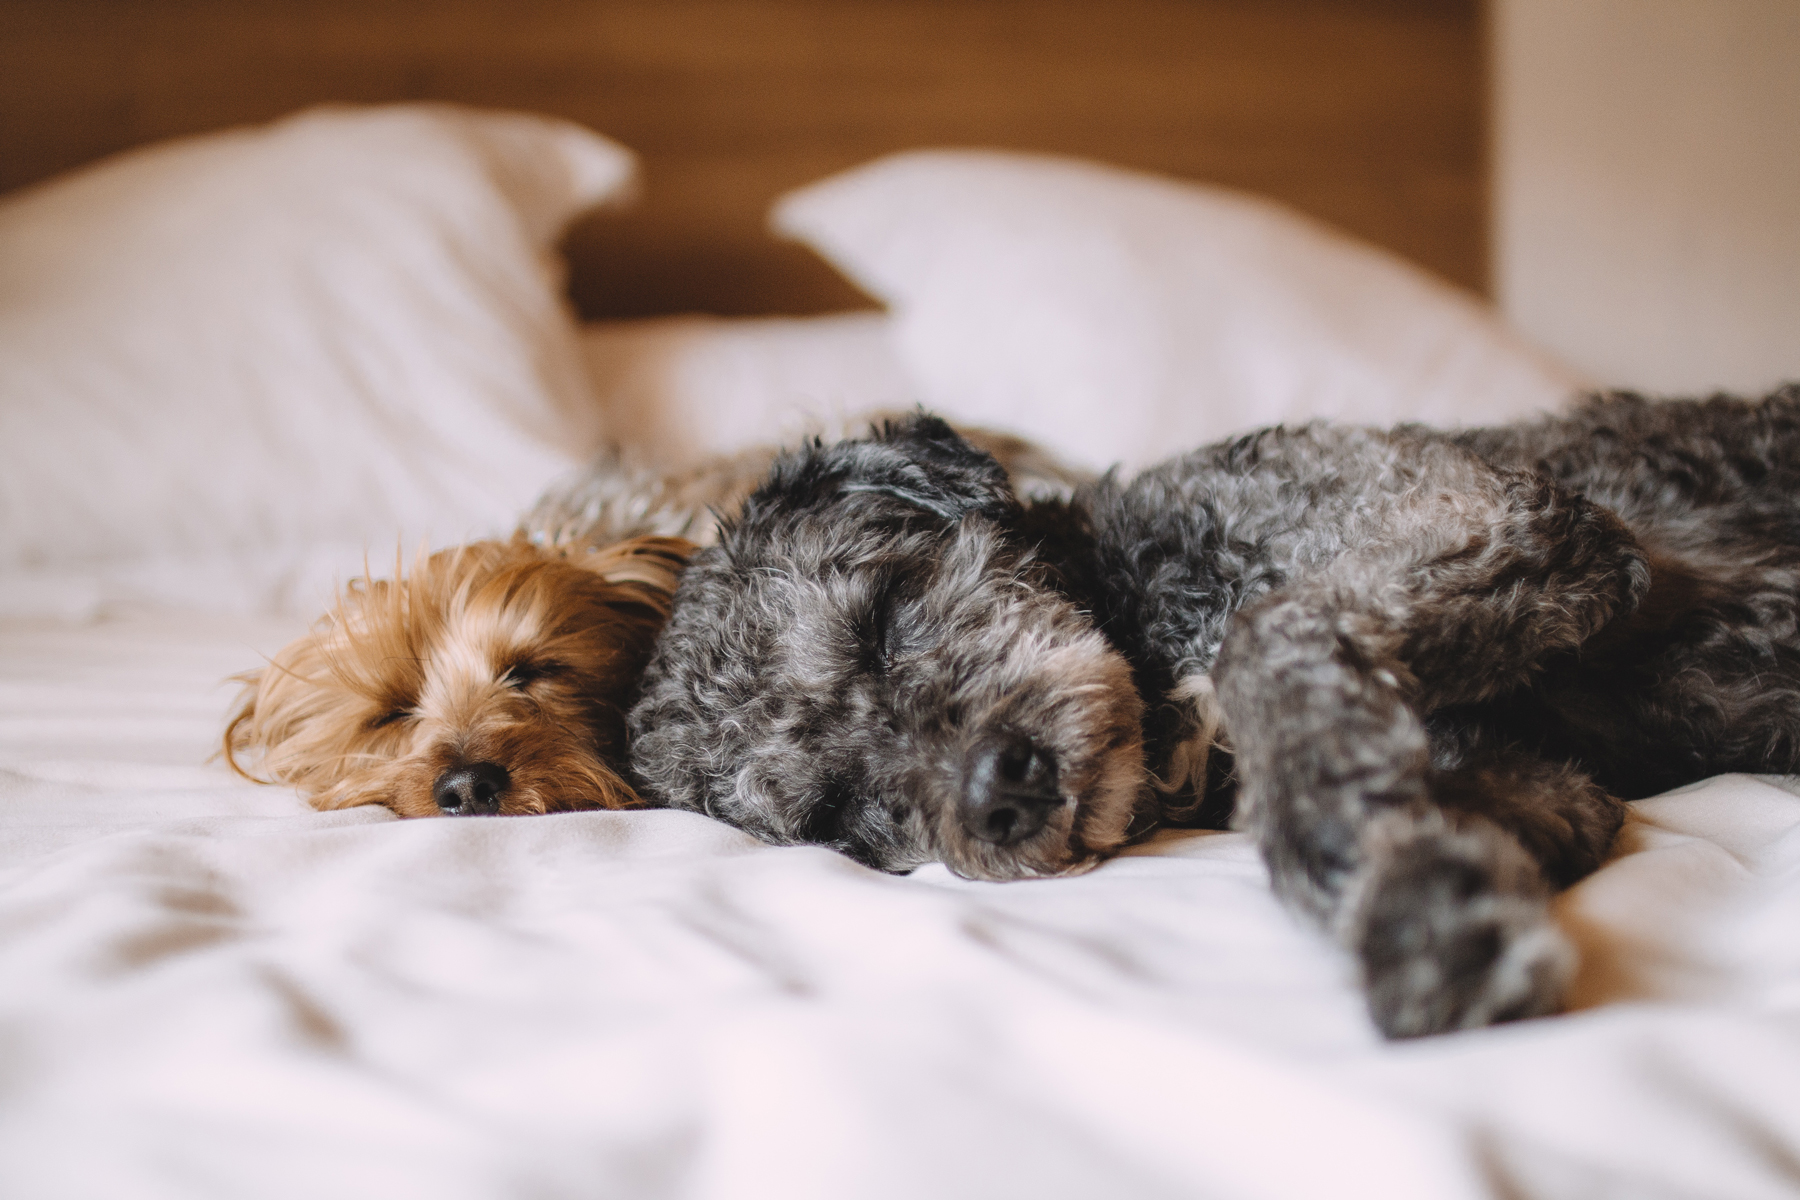 Our recommendations for the best dog friendly hotels in the UK